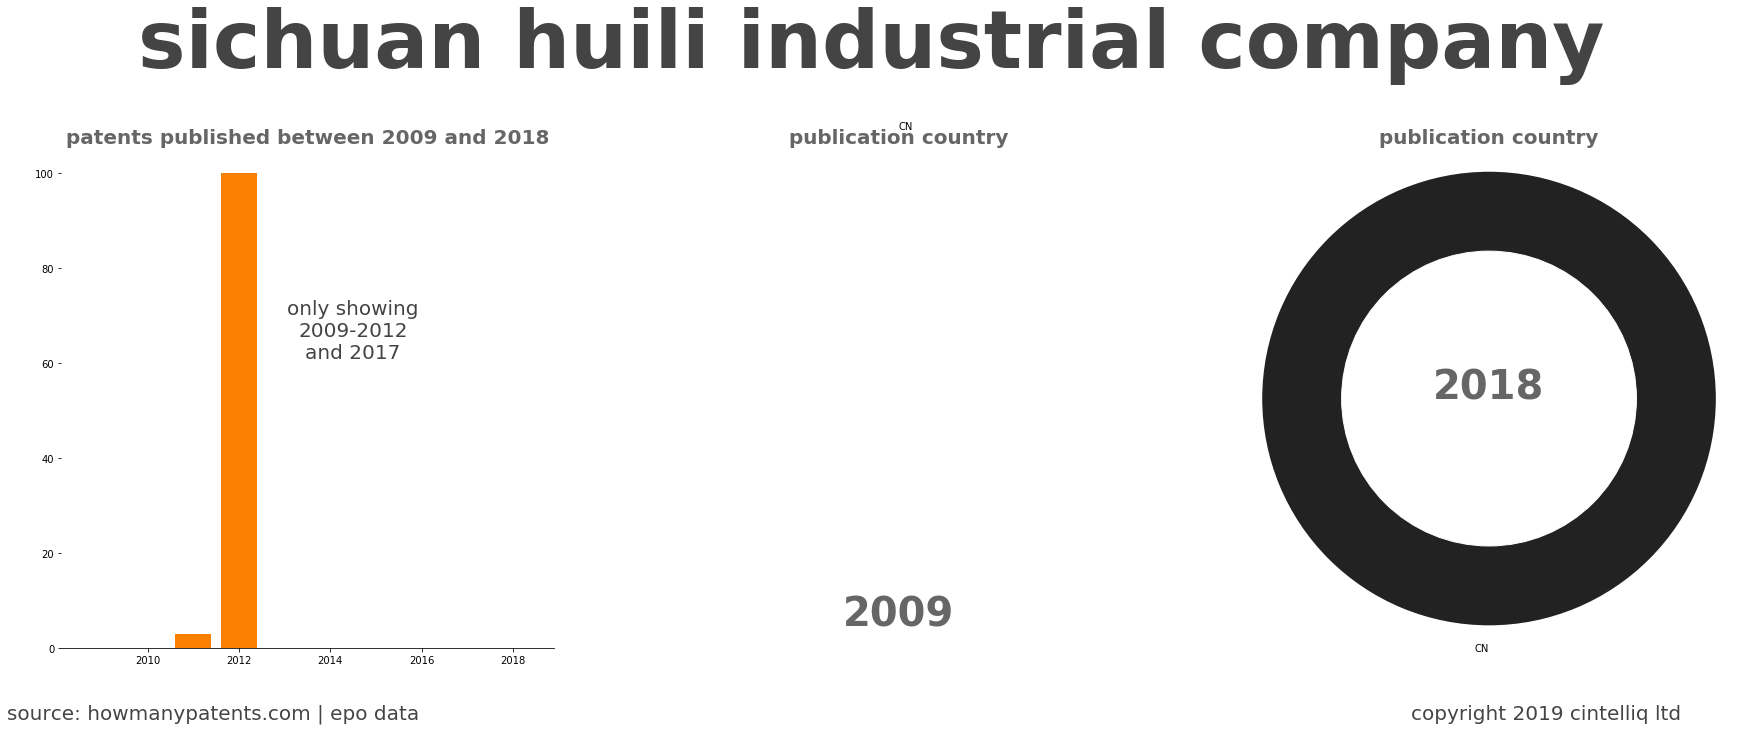 summary of patents for Sichuan Huili Industrial Company